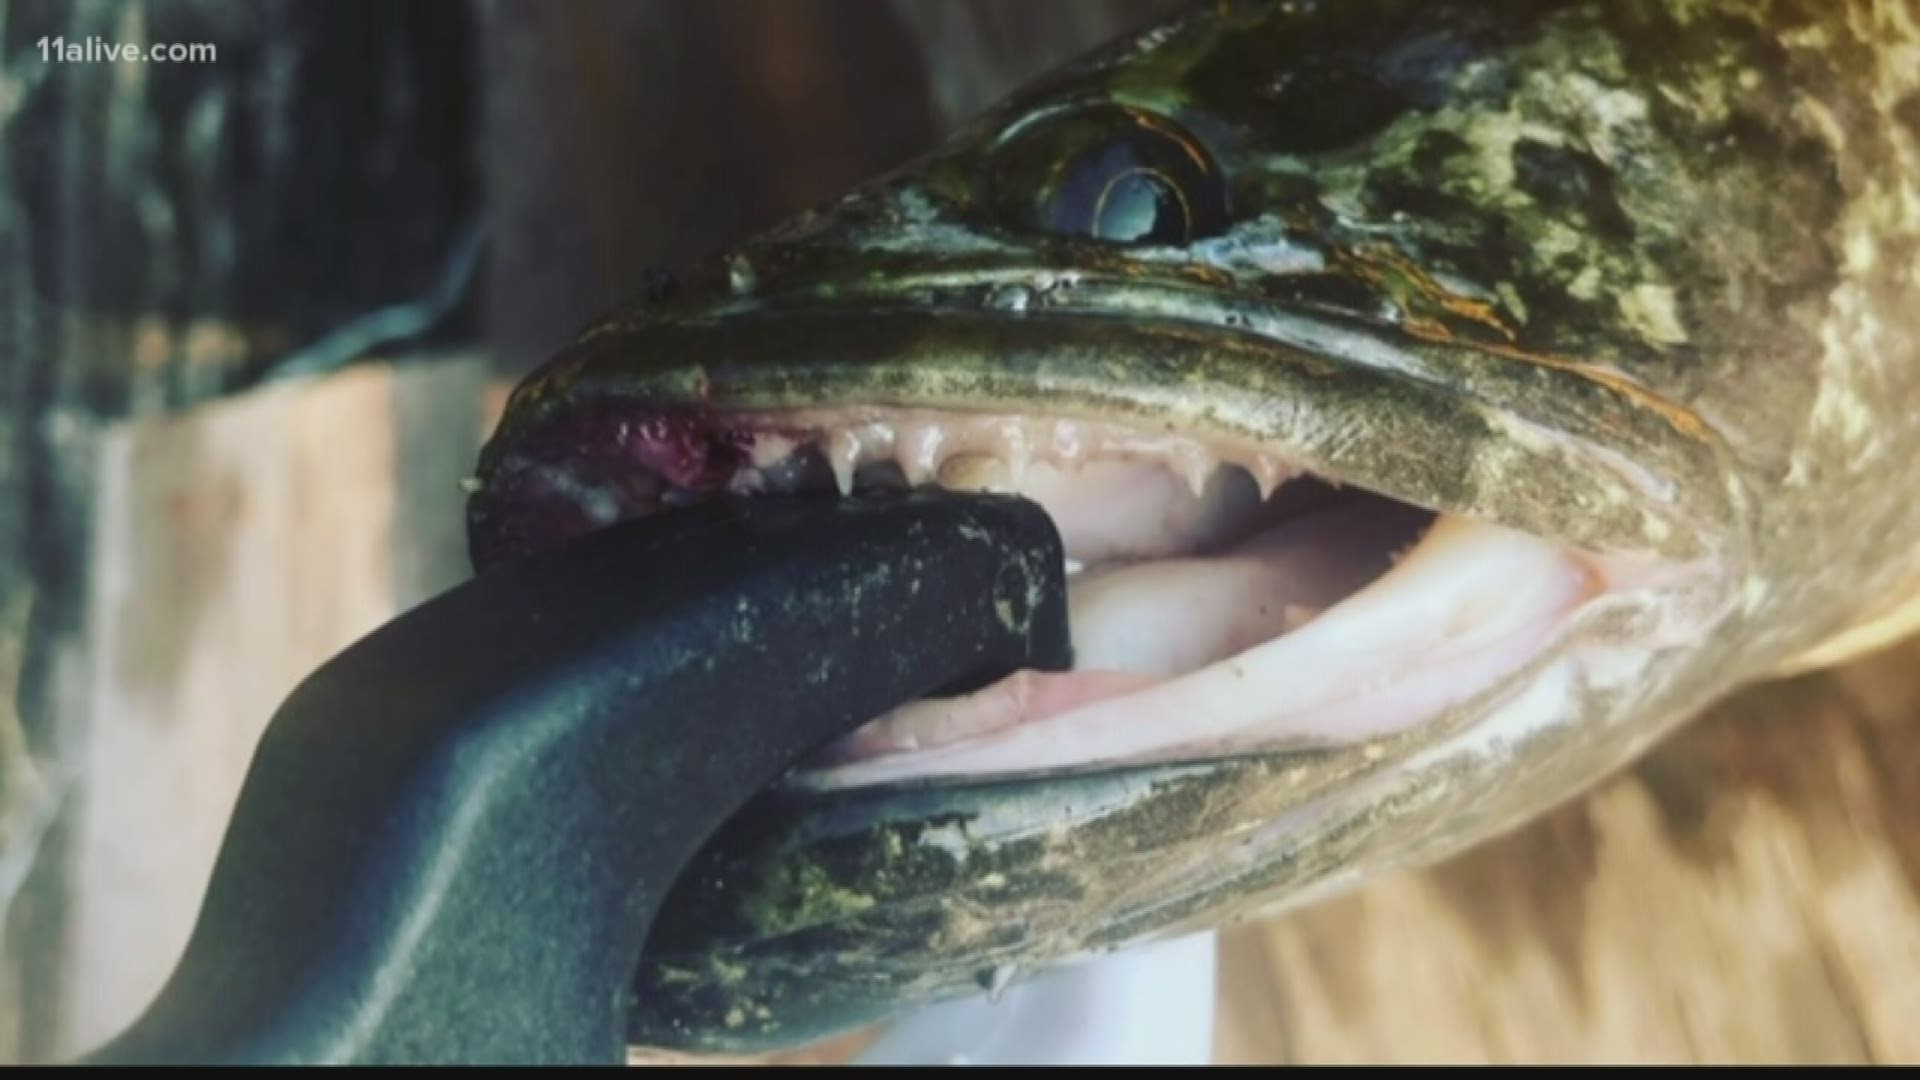 DNR officials said if you see a northern snakehead, you should "kill it immediately."